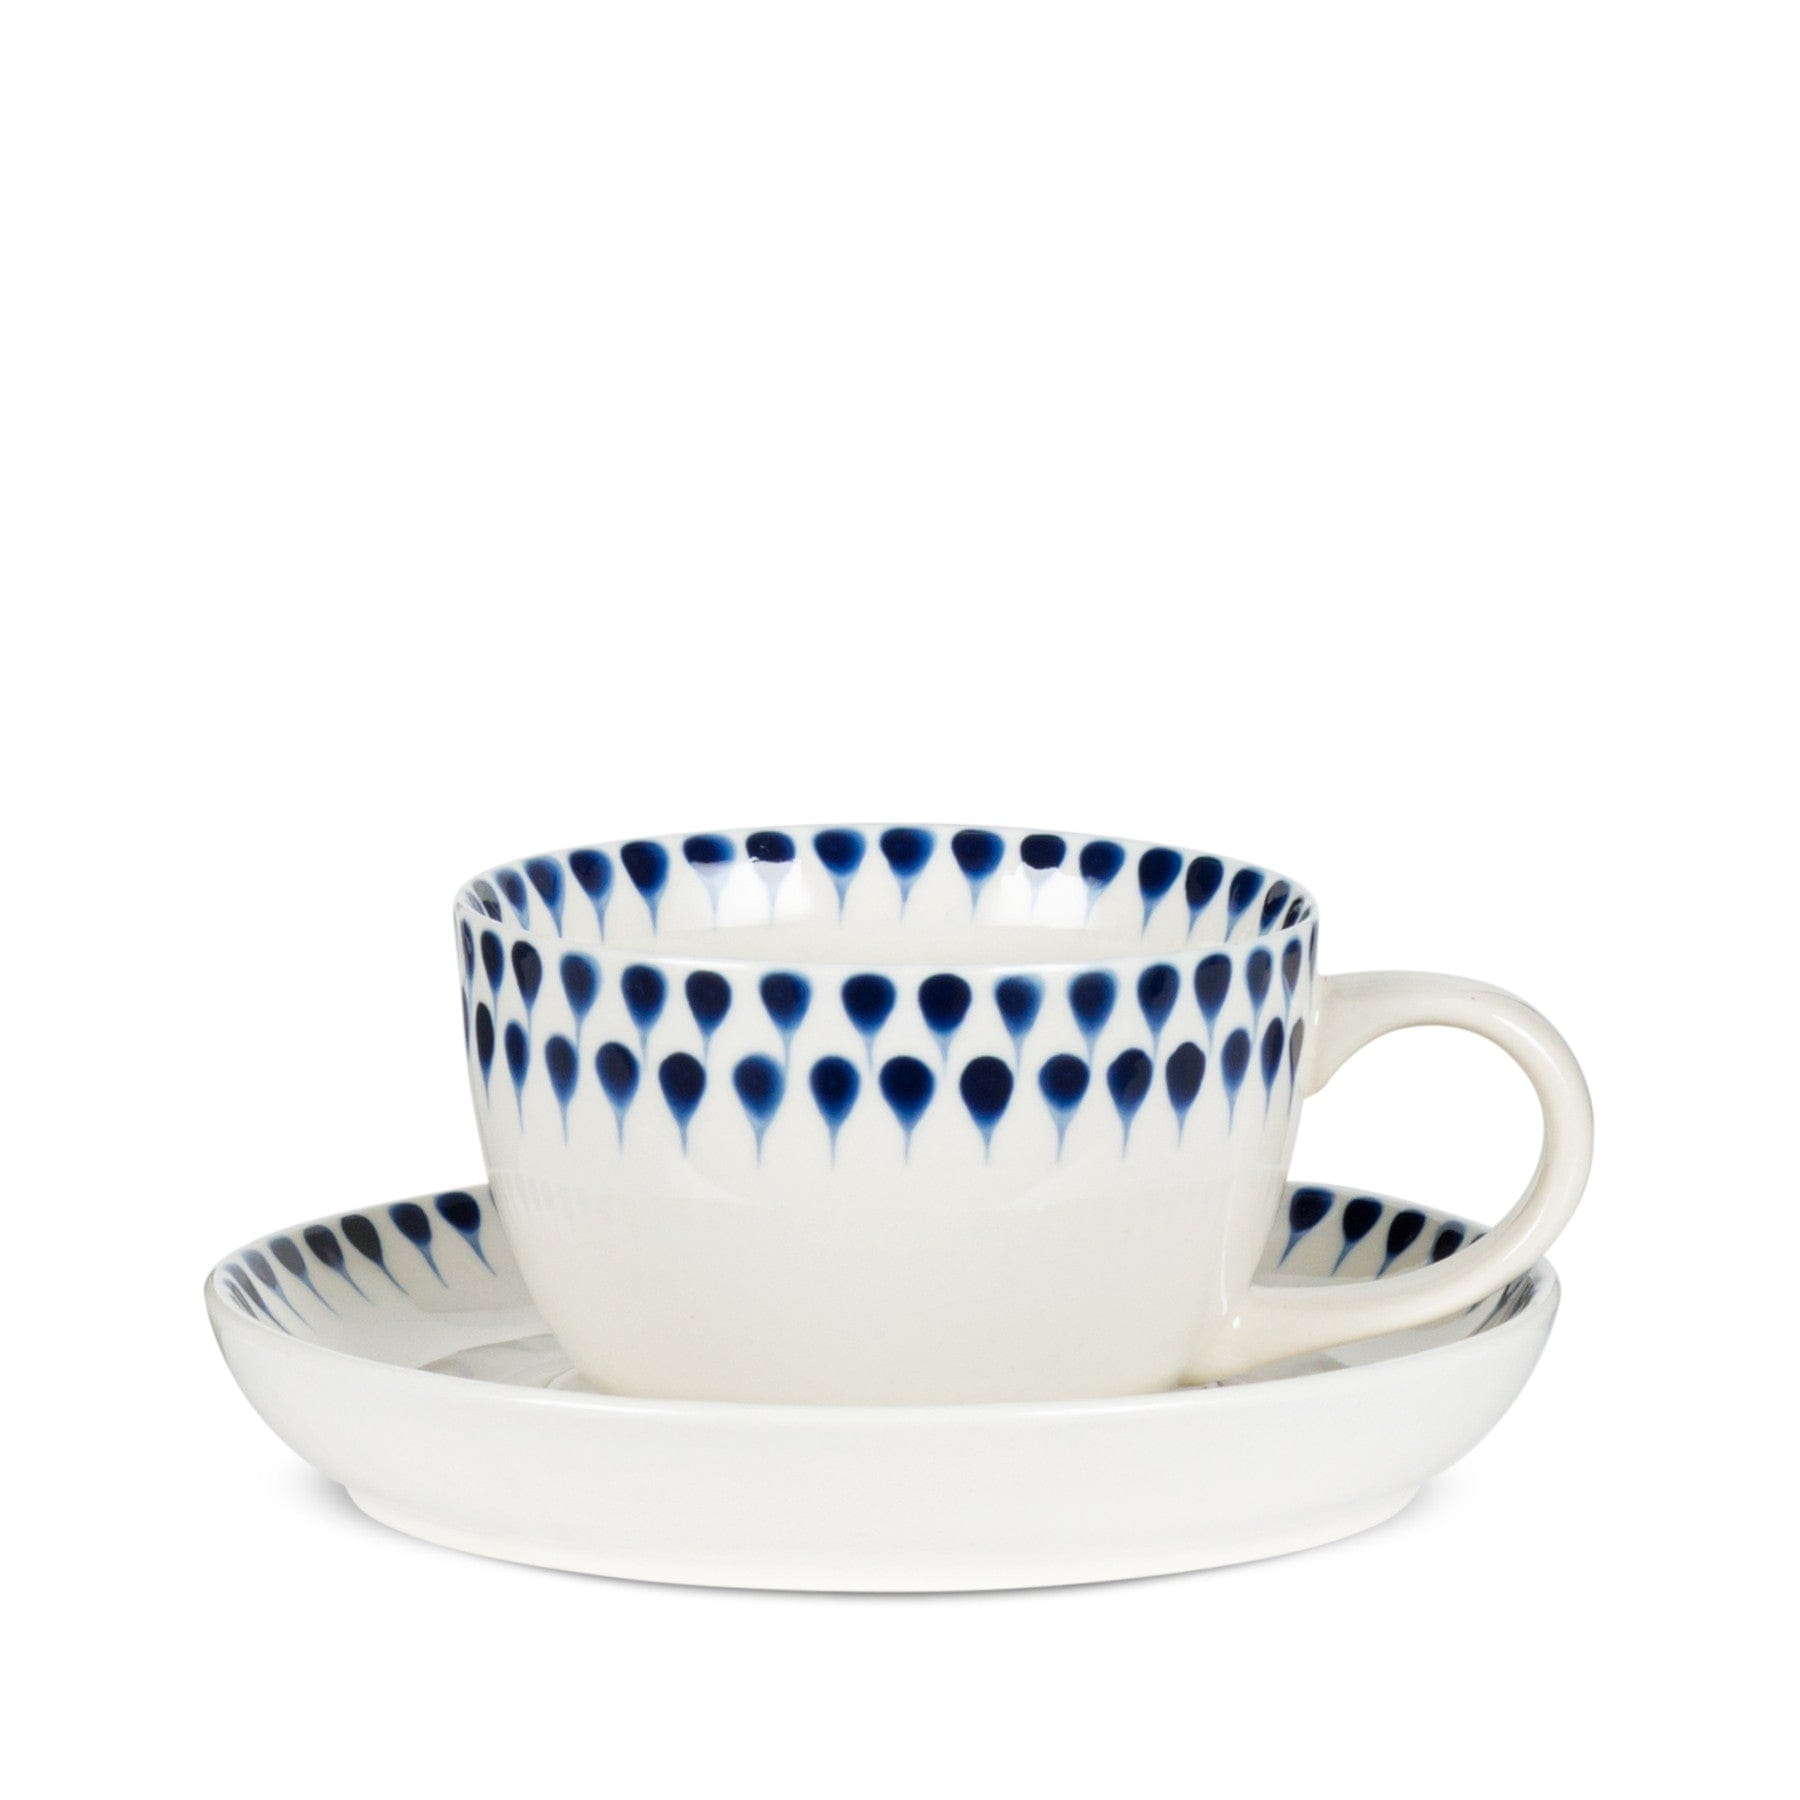 Porcelain teacup and saucer with blue teardrop pattern on white background